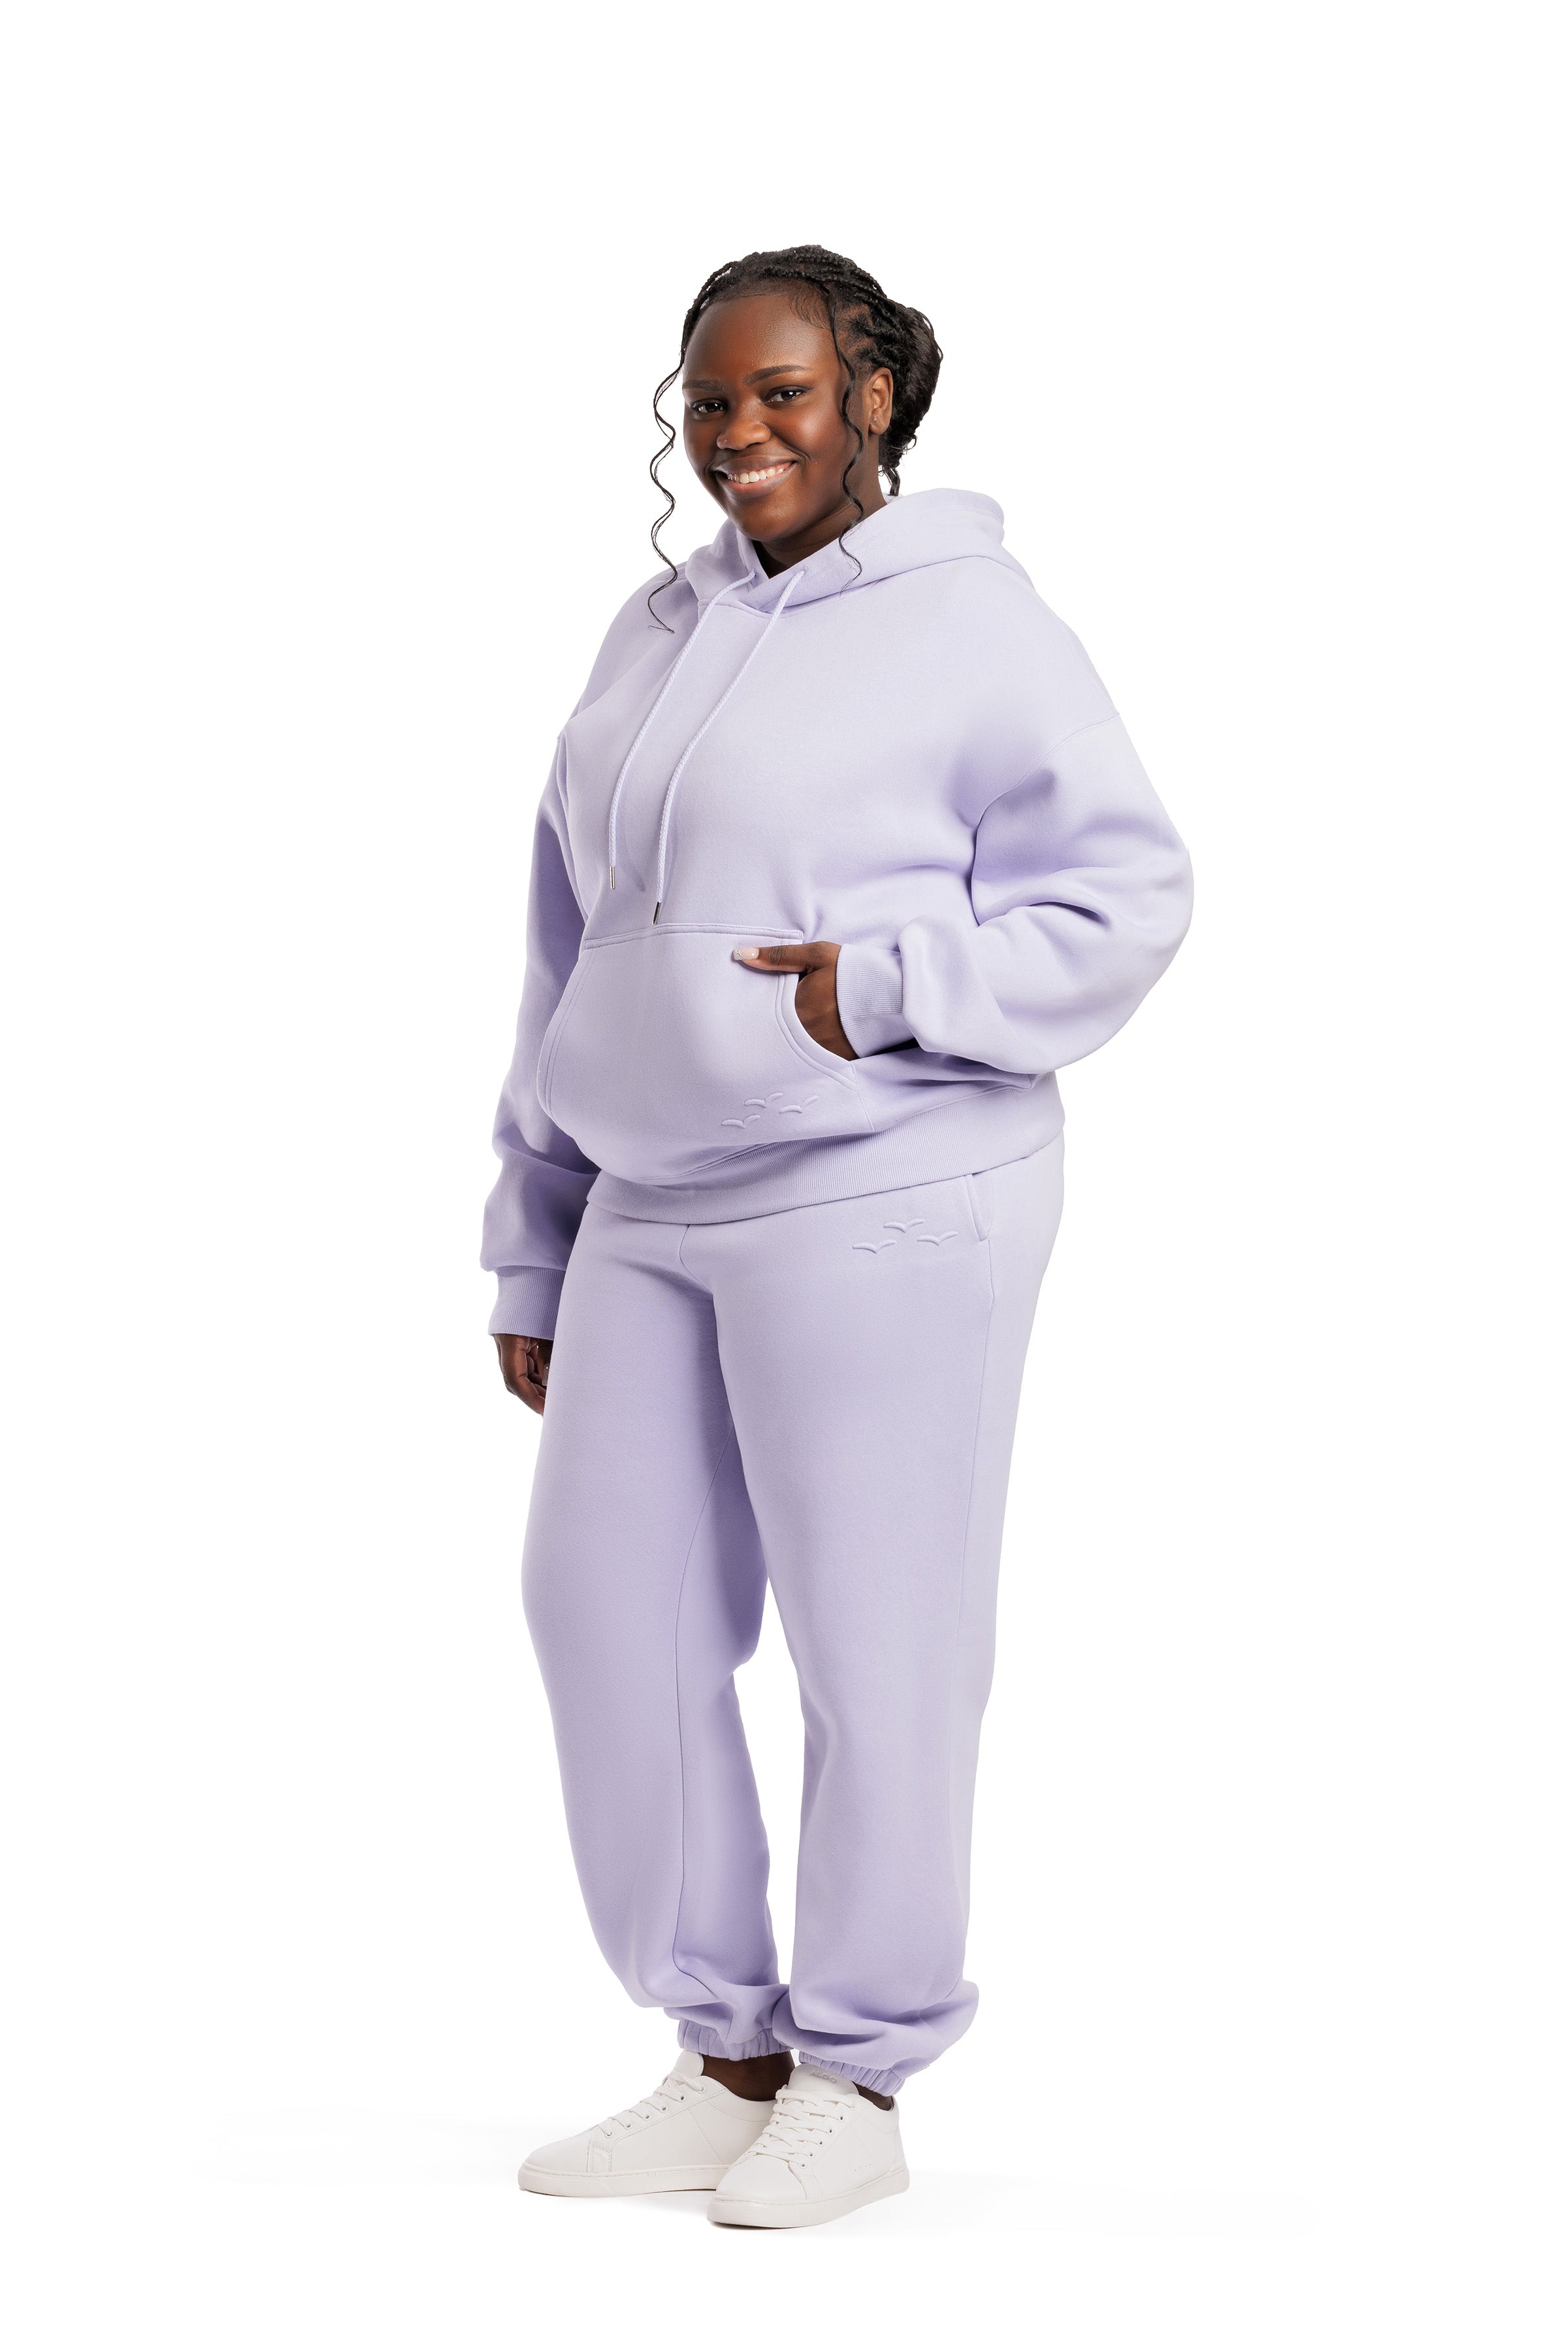 Women's tracksuit in lavender